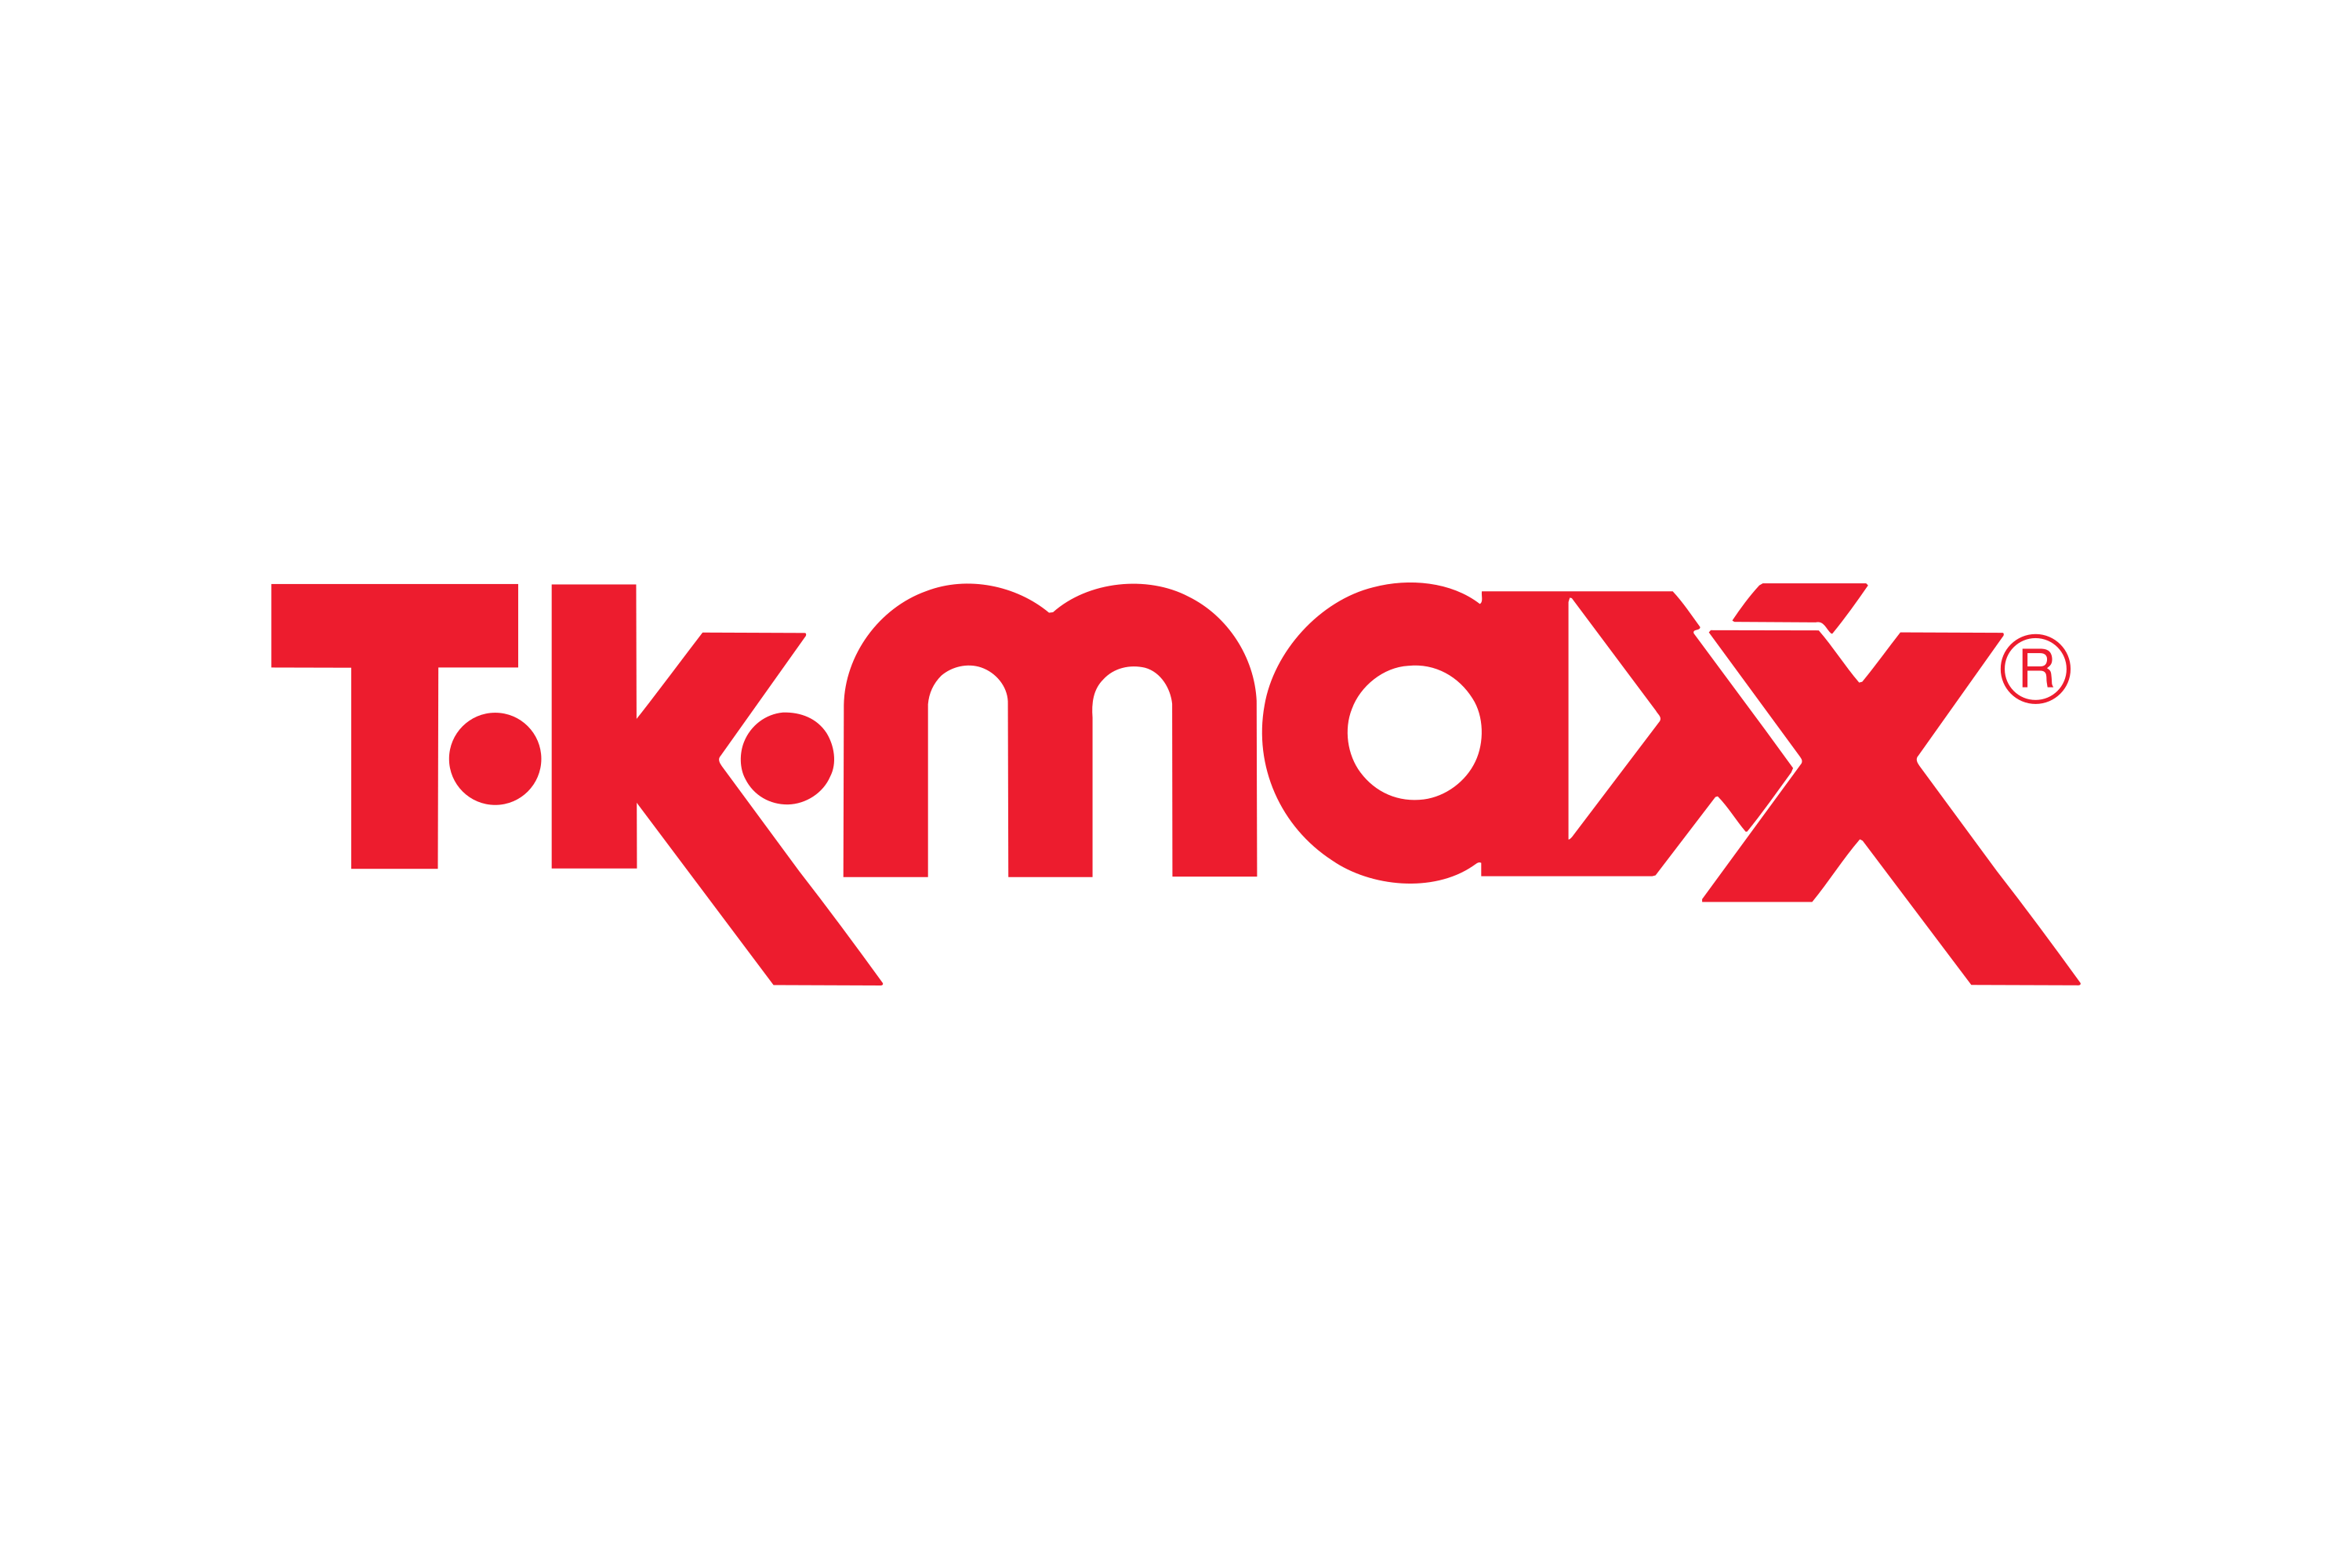 Tk maxx logo hi-res stock photography and images - Alamy